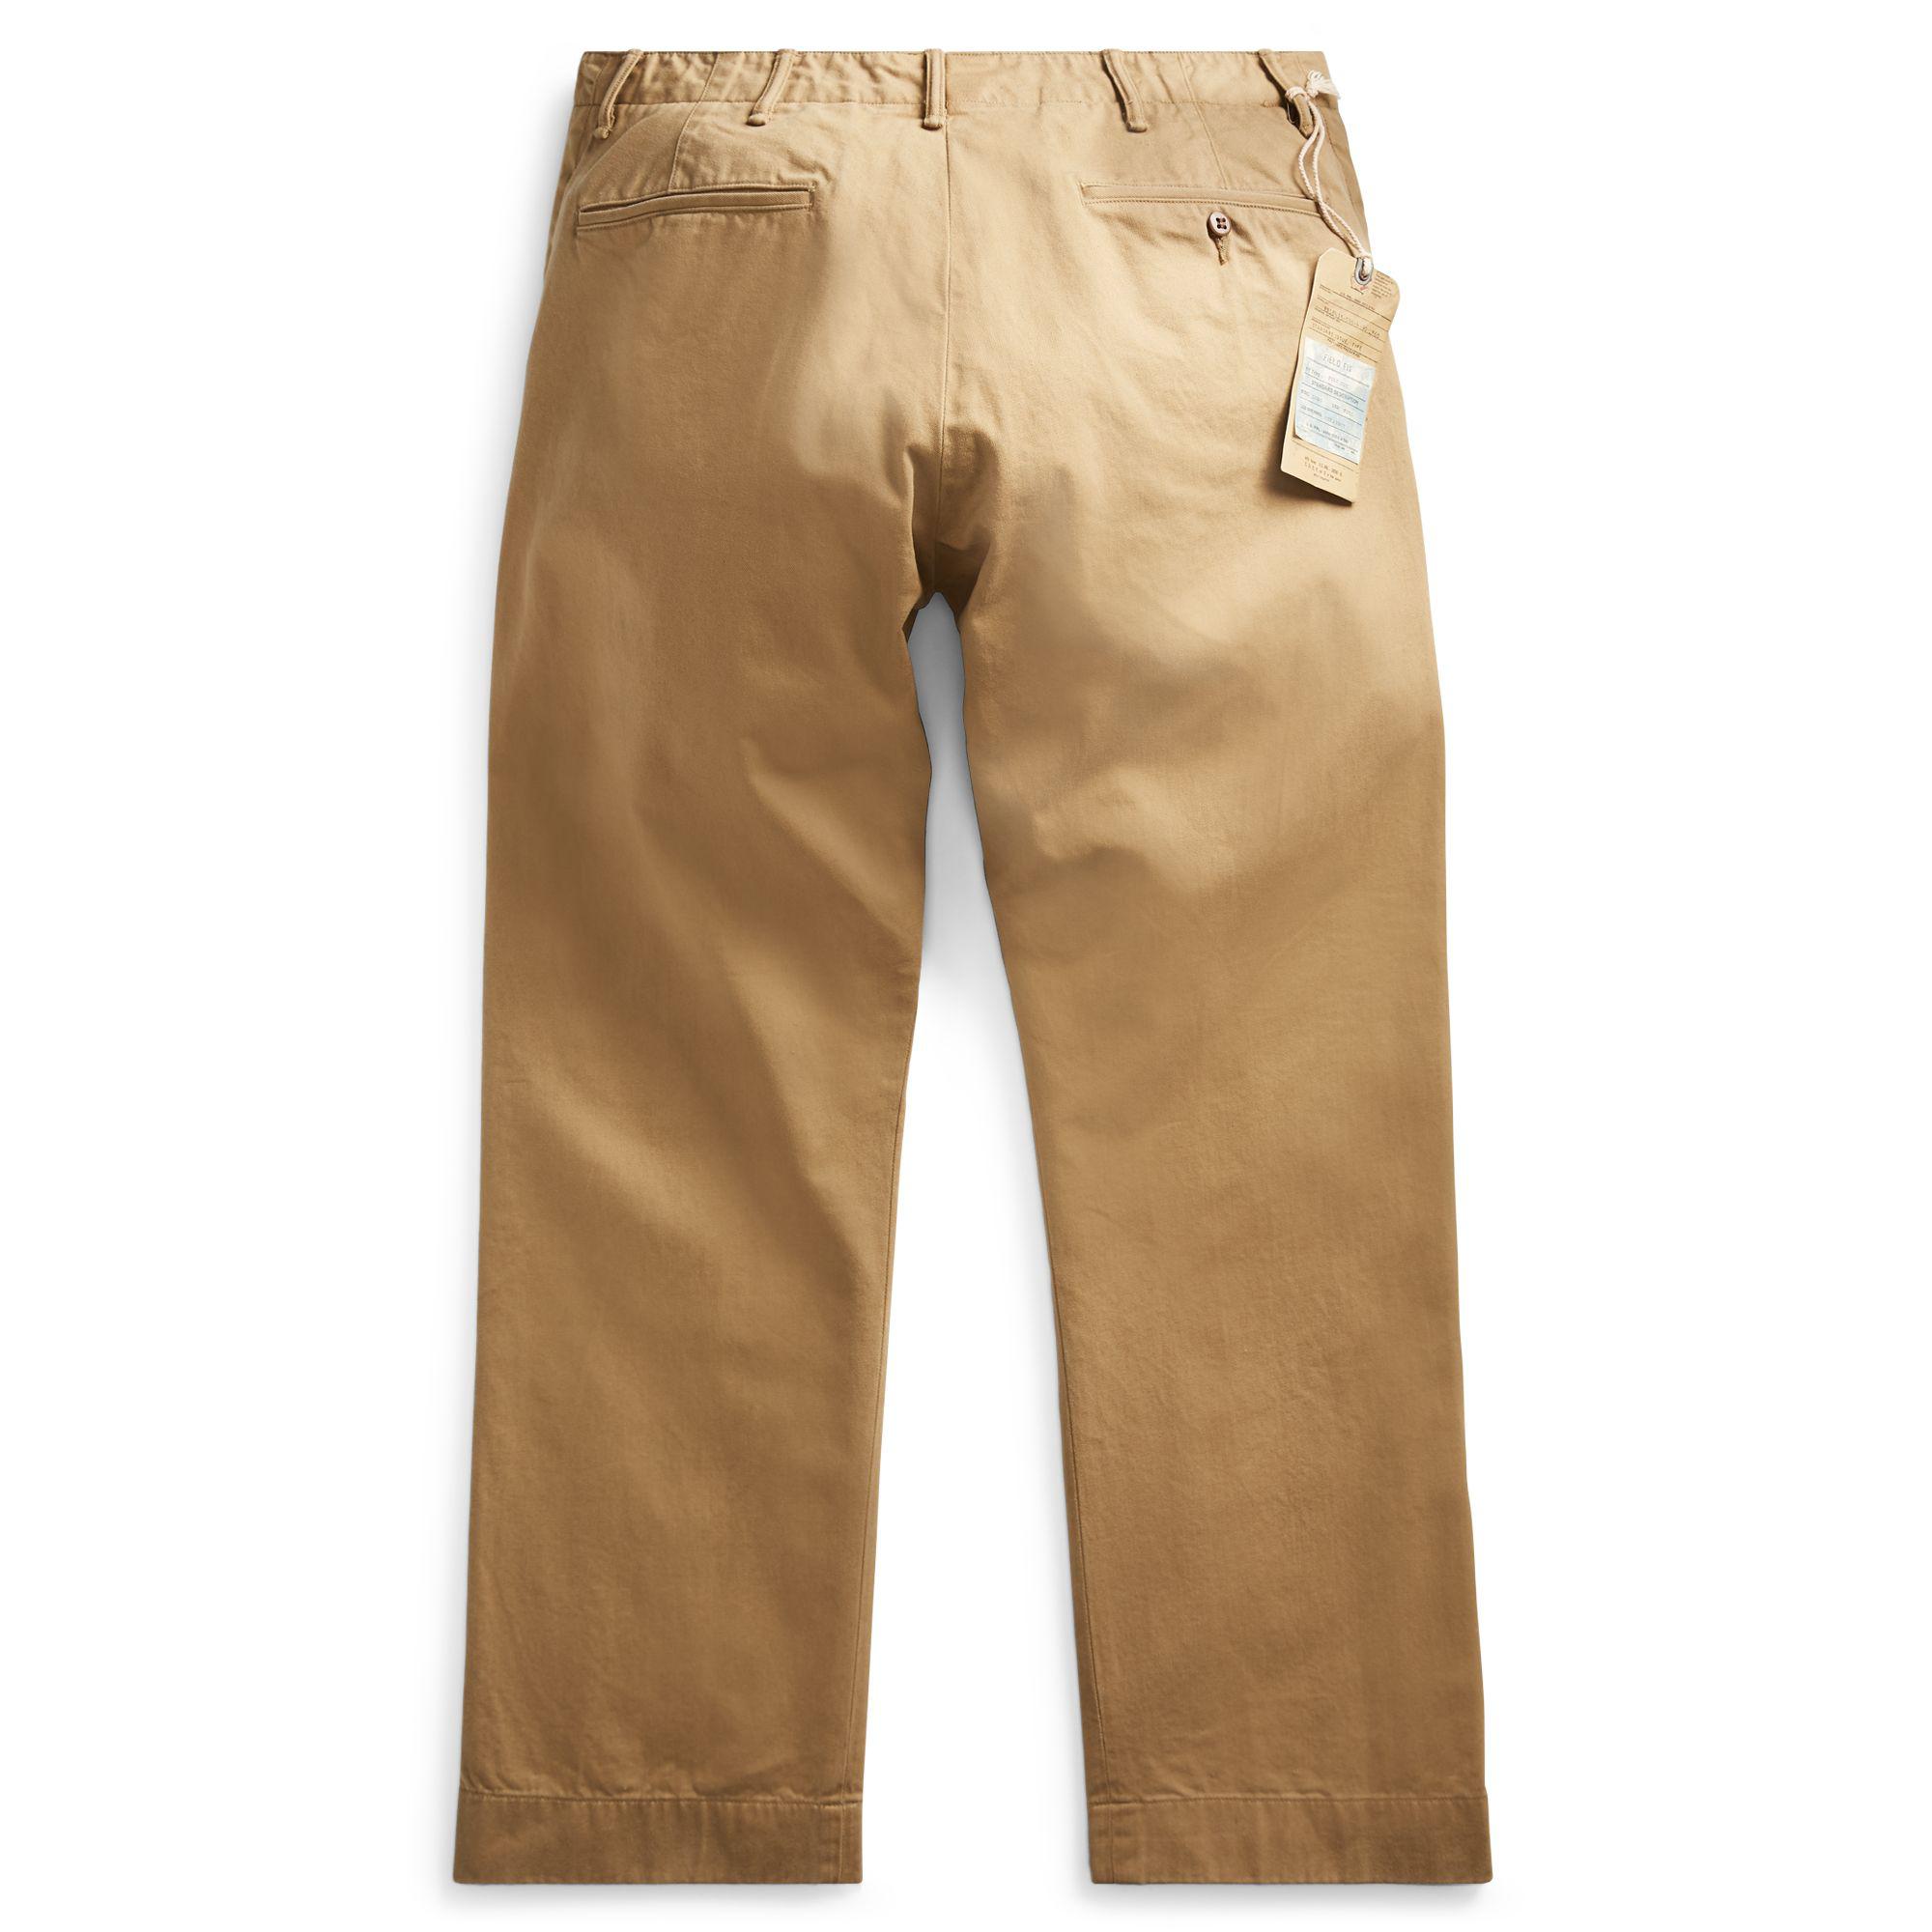 RRL Cotton Field Chino in Natural for Men - Lyst